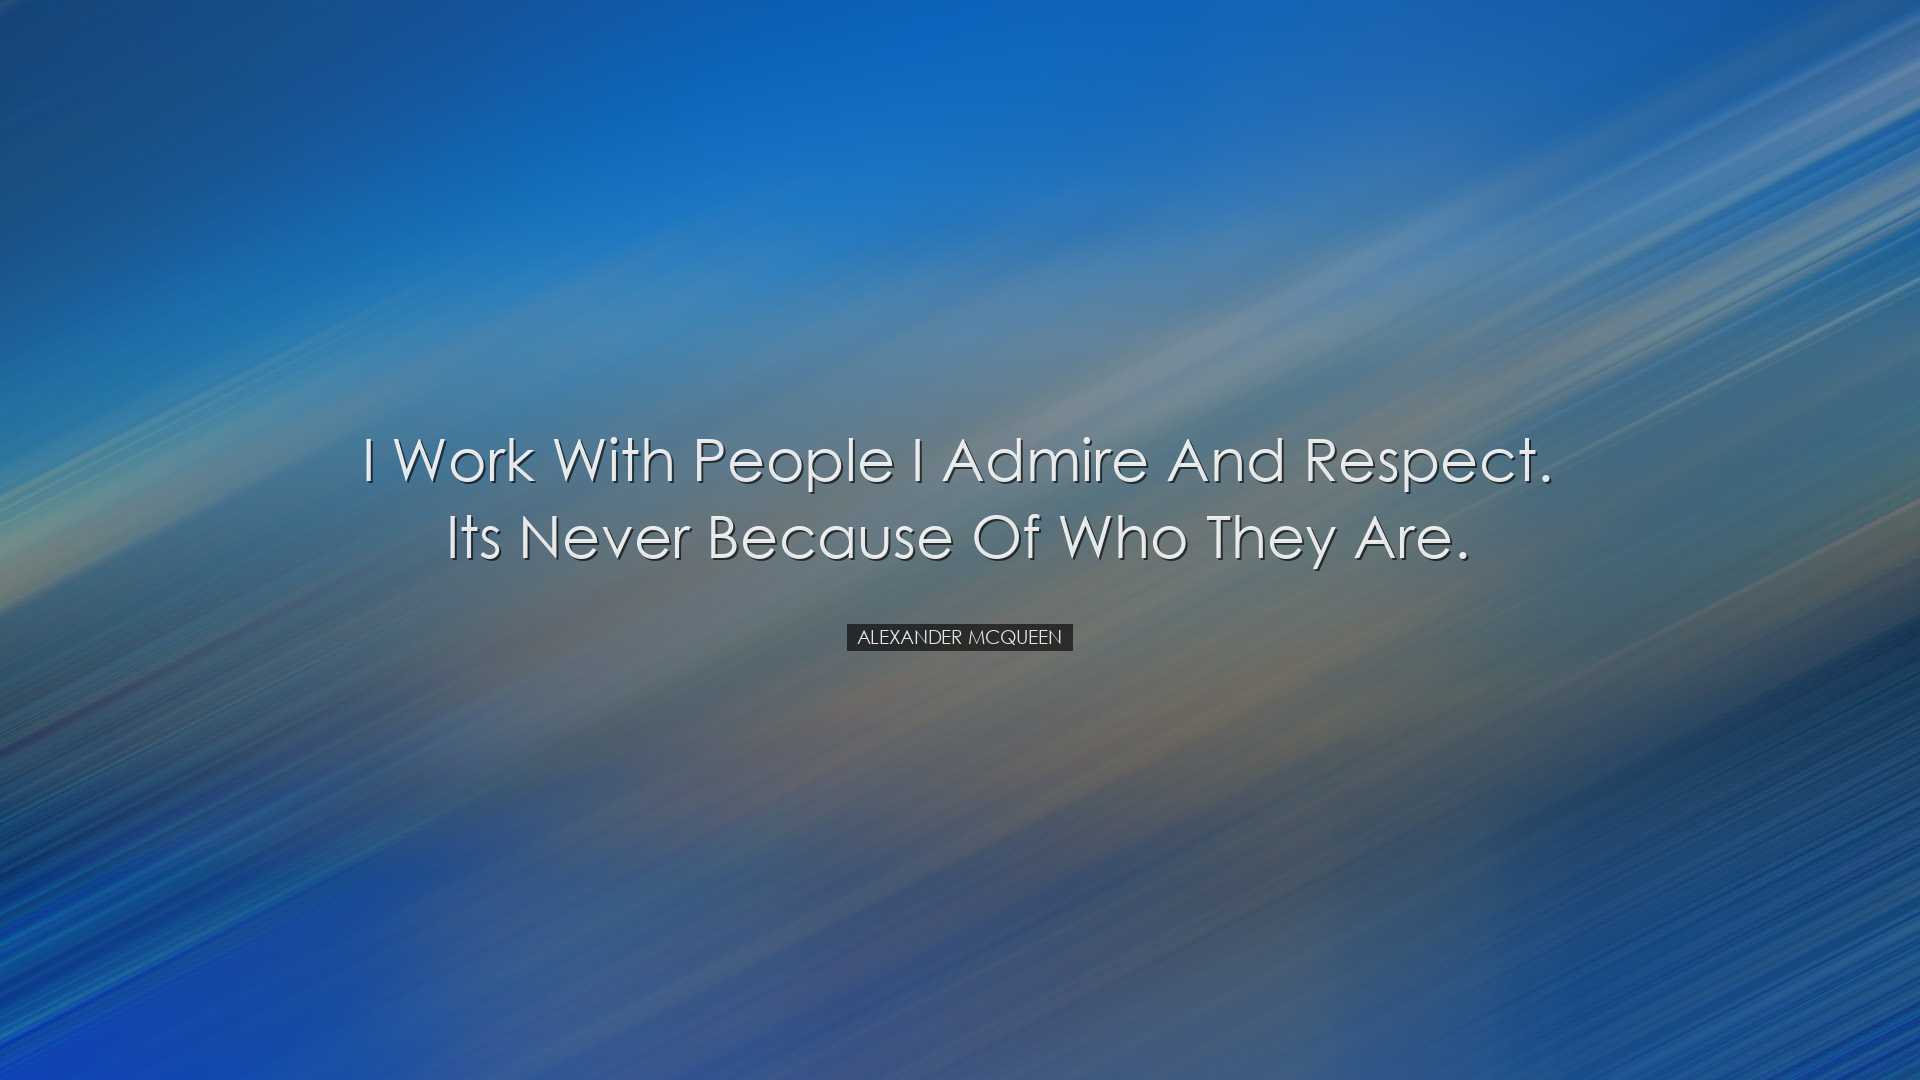 I work with people I admire and respect. Its never because of who